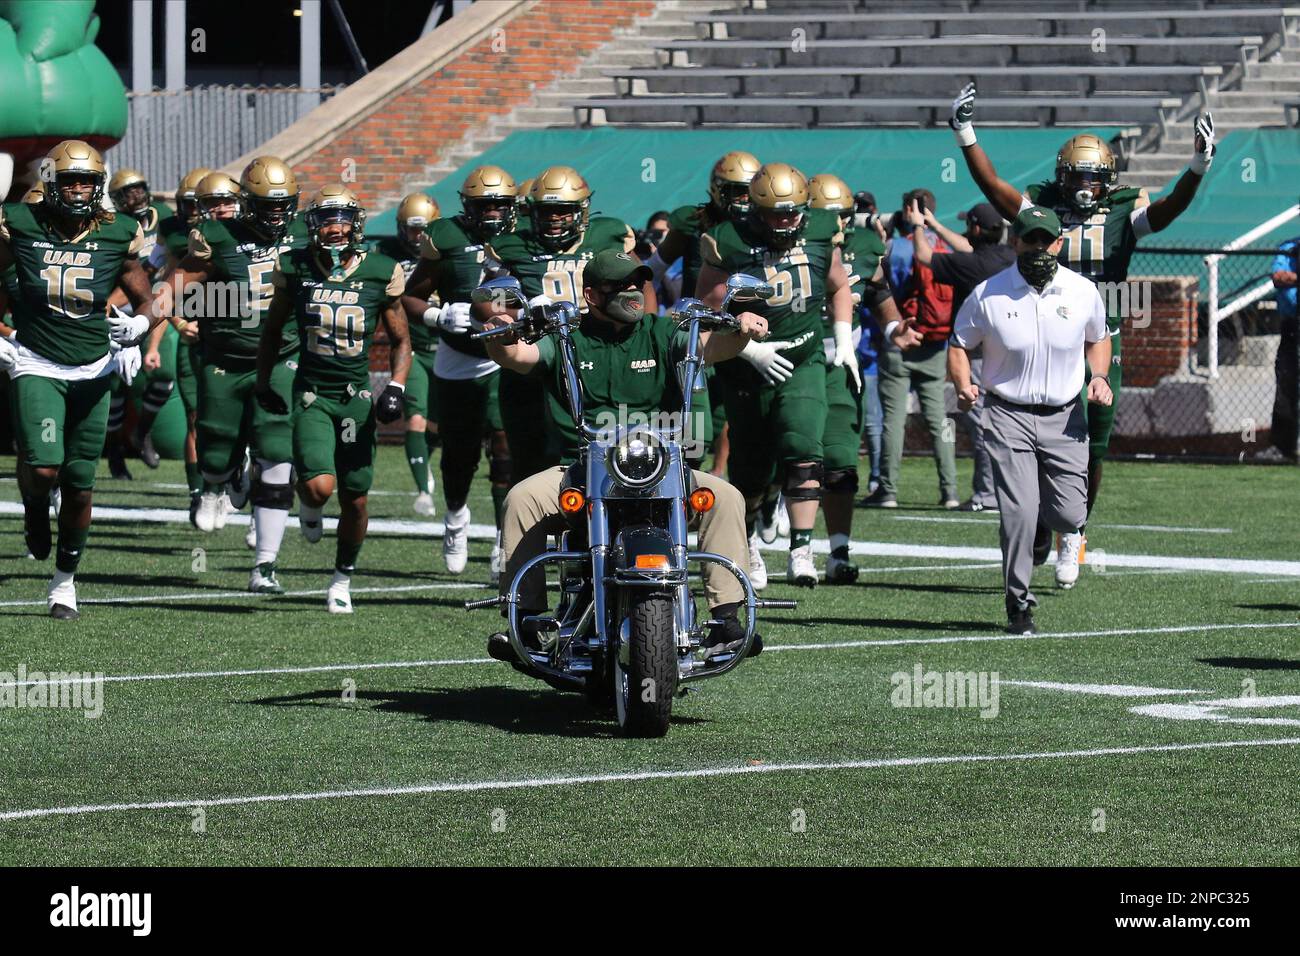 https://c8.alamy.com/comp/2NPC325/birmingham-al-october-17-the-uab-blazers-run-out-onto-the-field-for-the-game-between-uab-blazers-and-western-kentucky-hilltoppers-on-october-17-2020-at-legion-field-in-birmingham-alabama-photo-by-michael-wadeicon-sportswire-icon-sportswire-via-ap-images-2NPC325.jpg